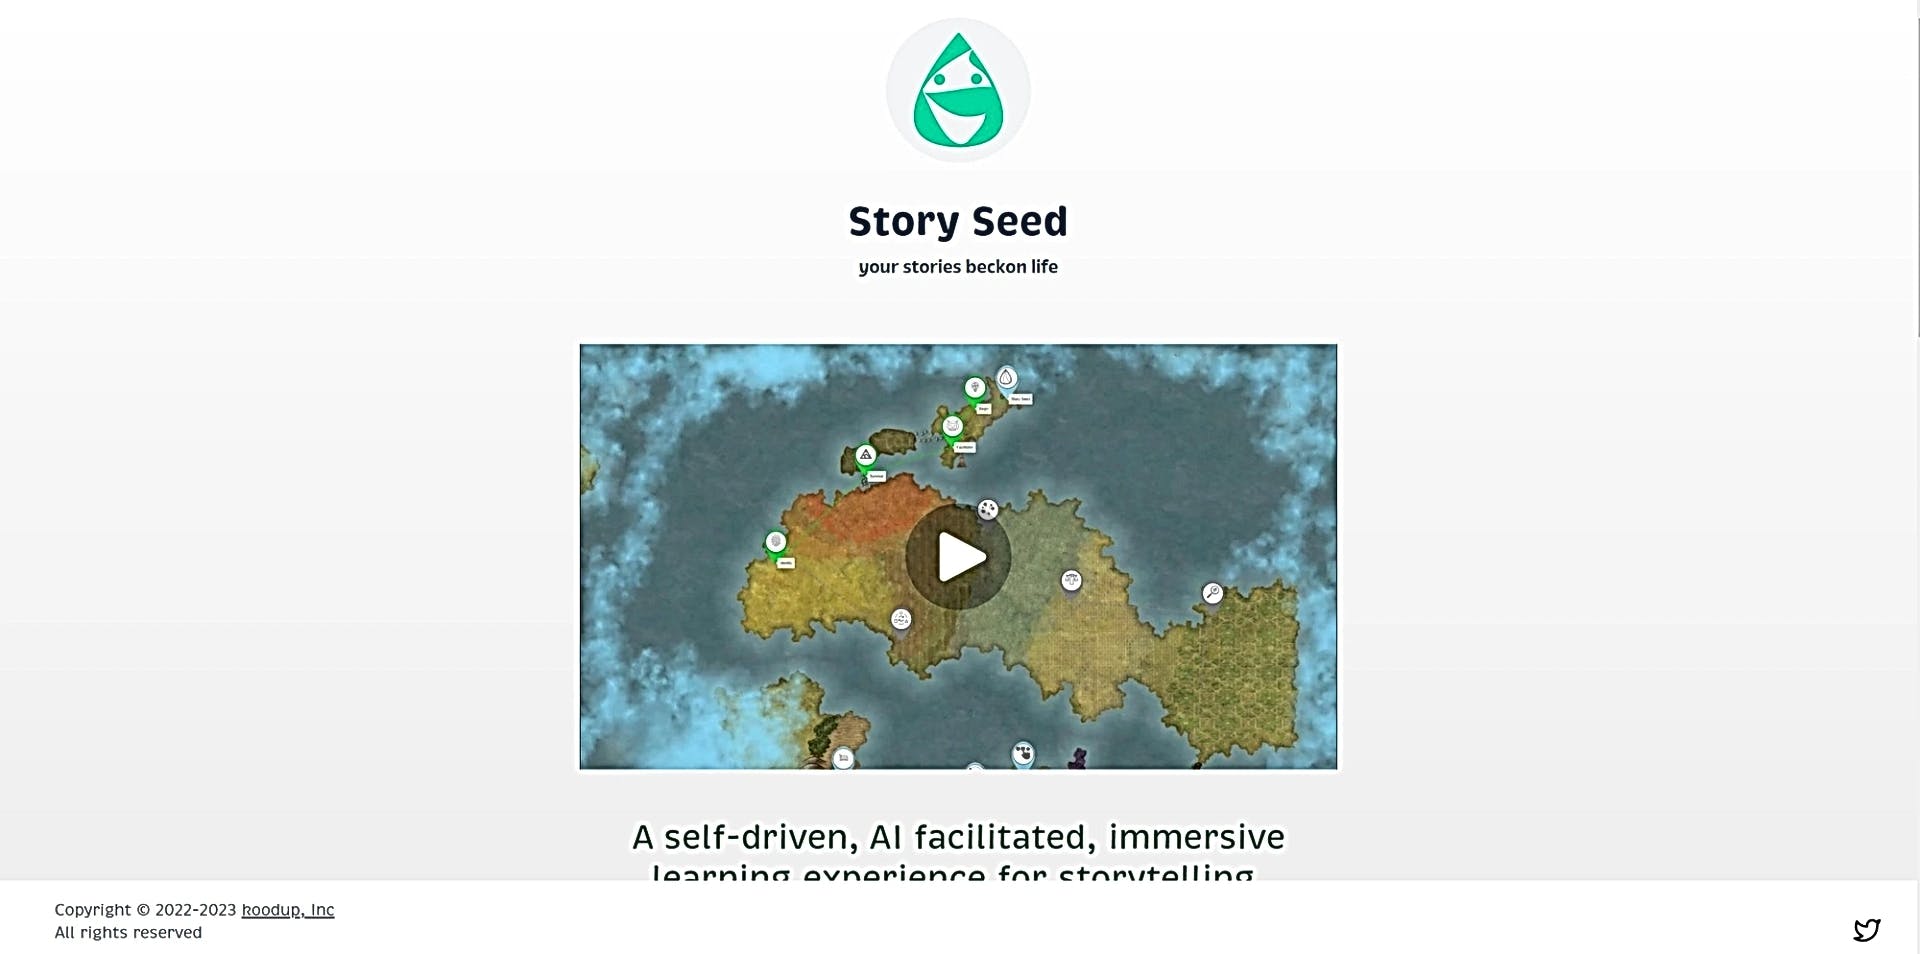 StorySeed featured